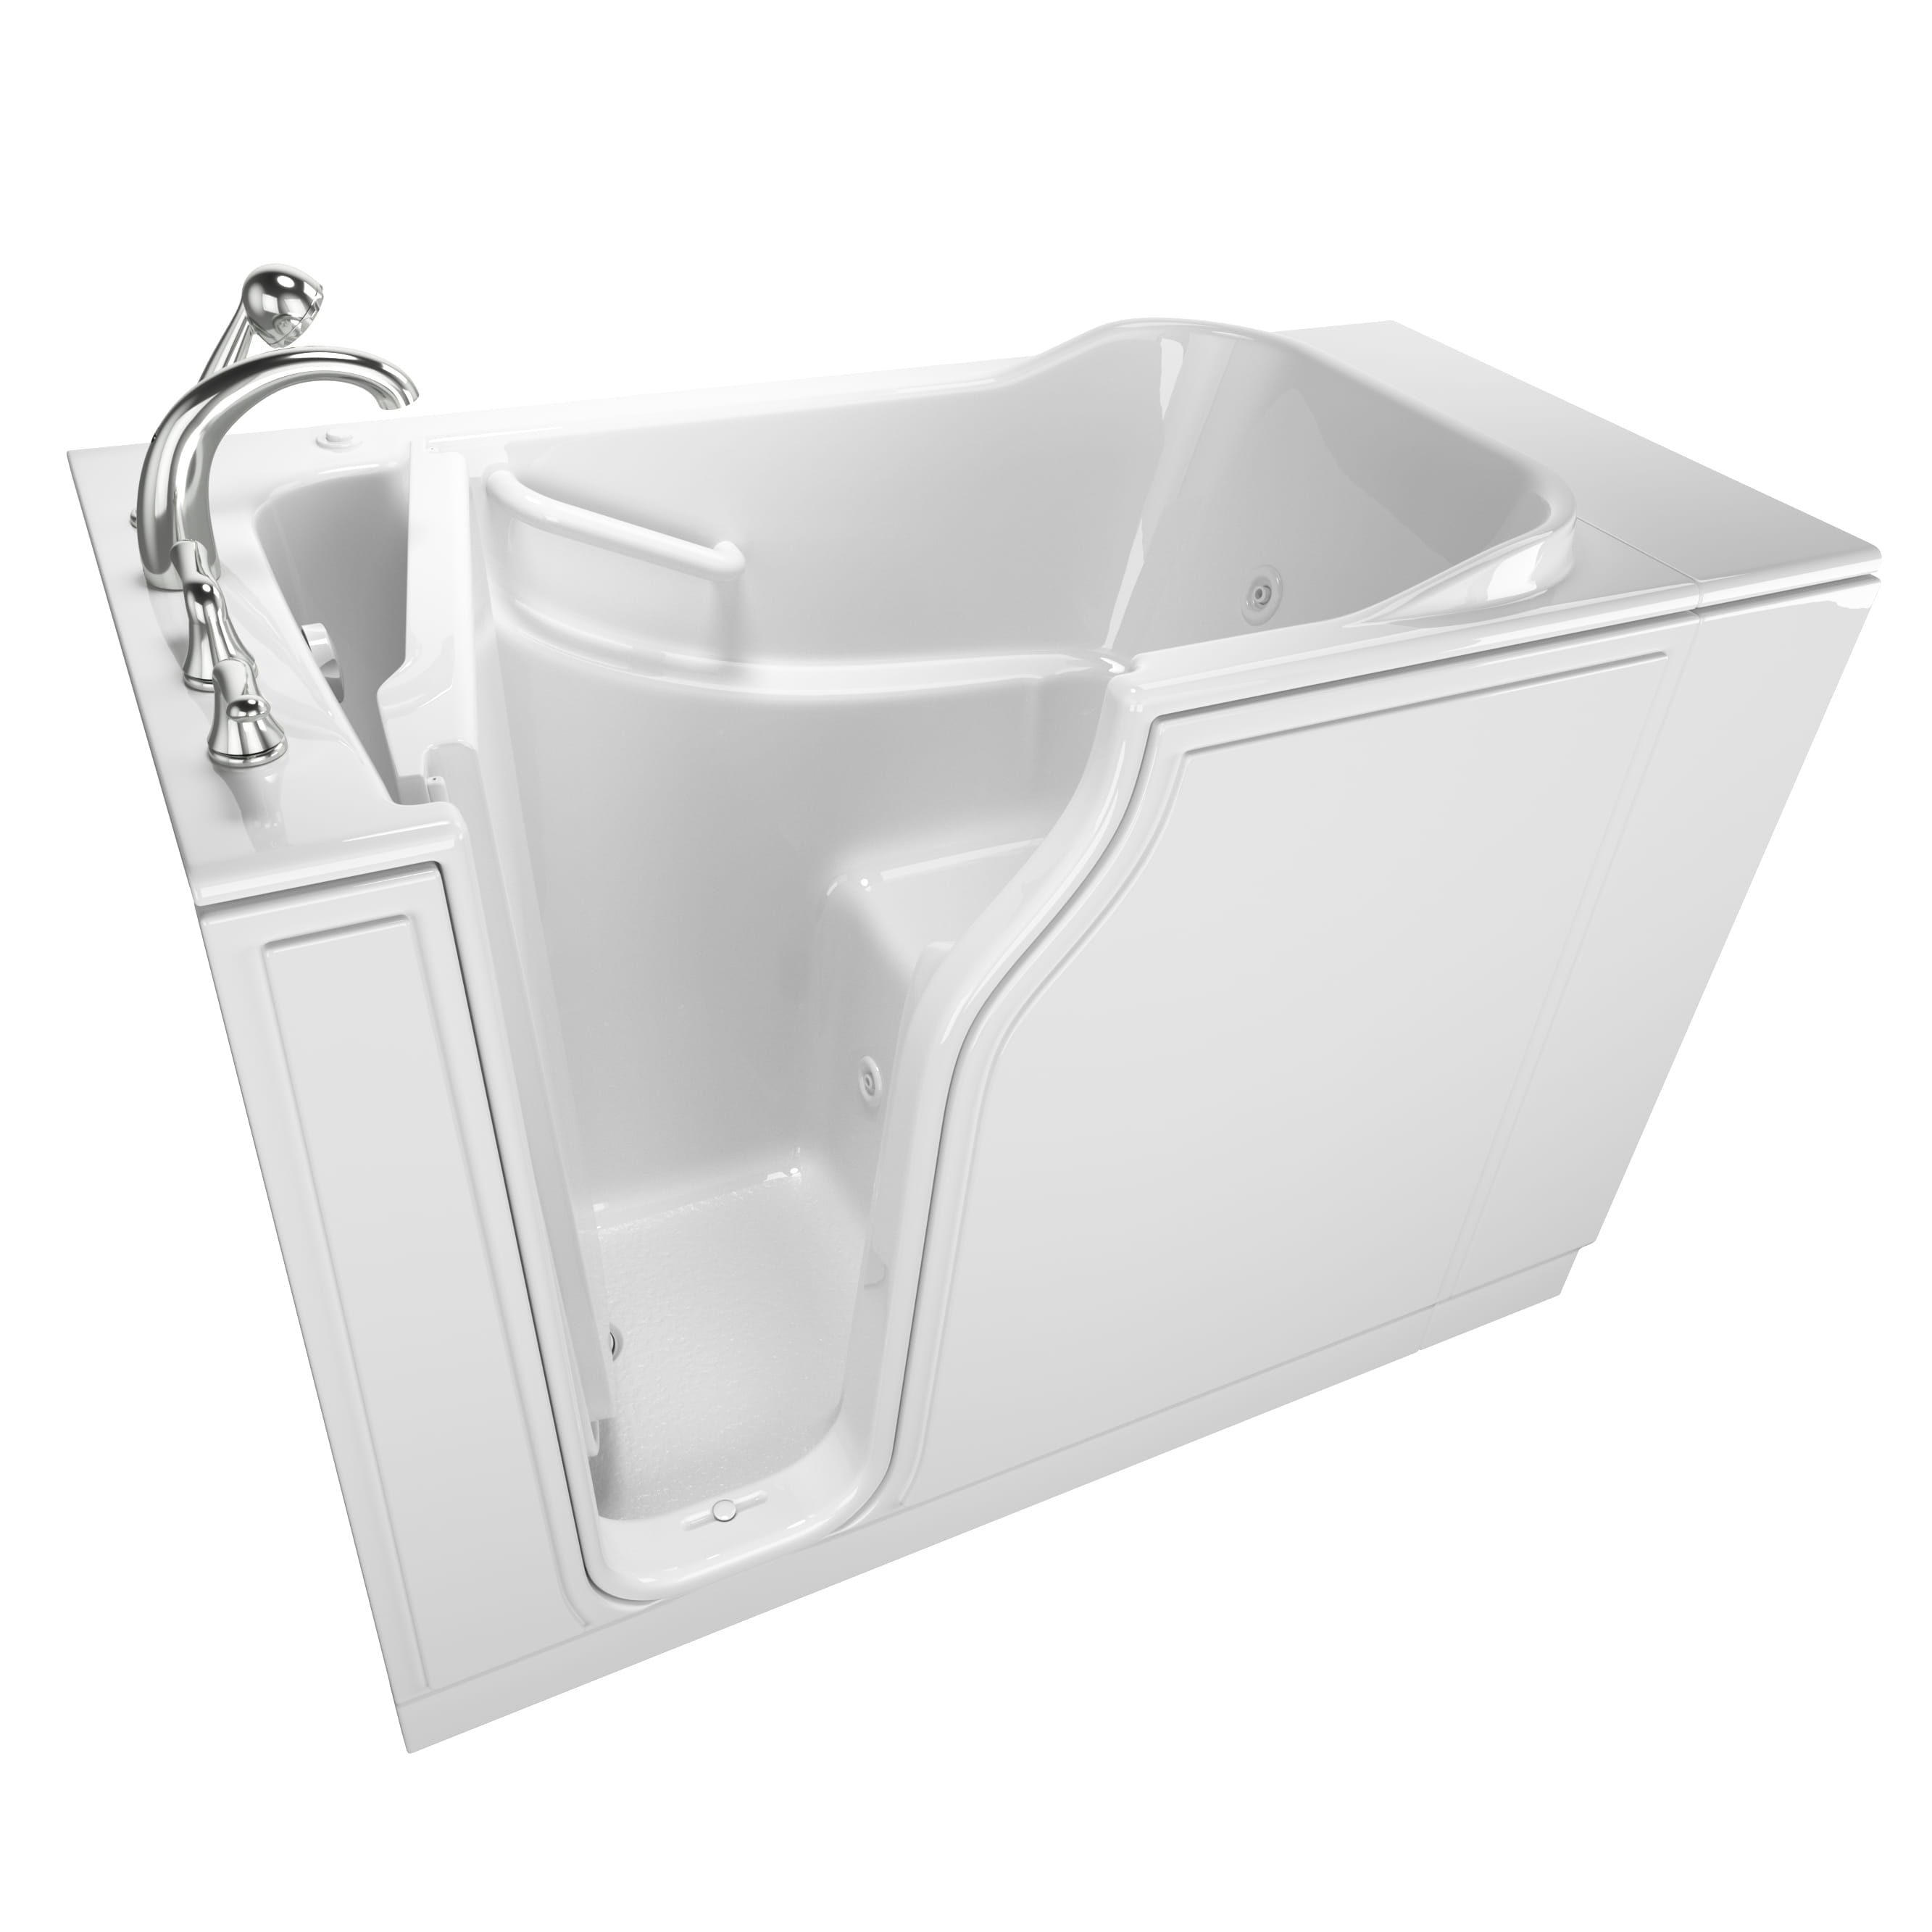 Gelcoat Entry Series 52 x 30 Inch Walk In Tub With Whirlpool System - Left Hand Drain With Faucet WIB WHITE